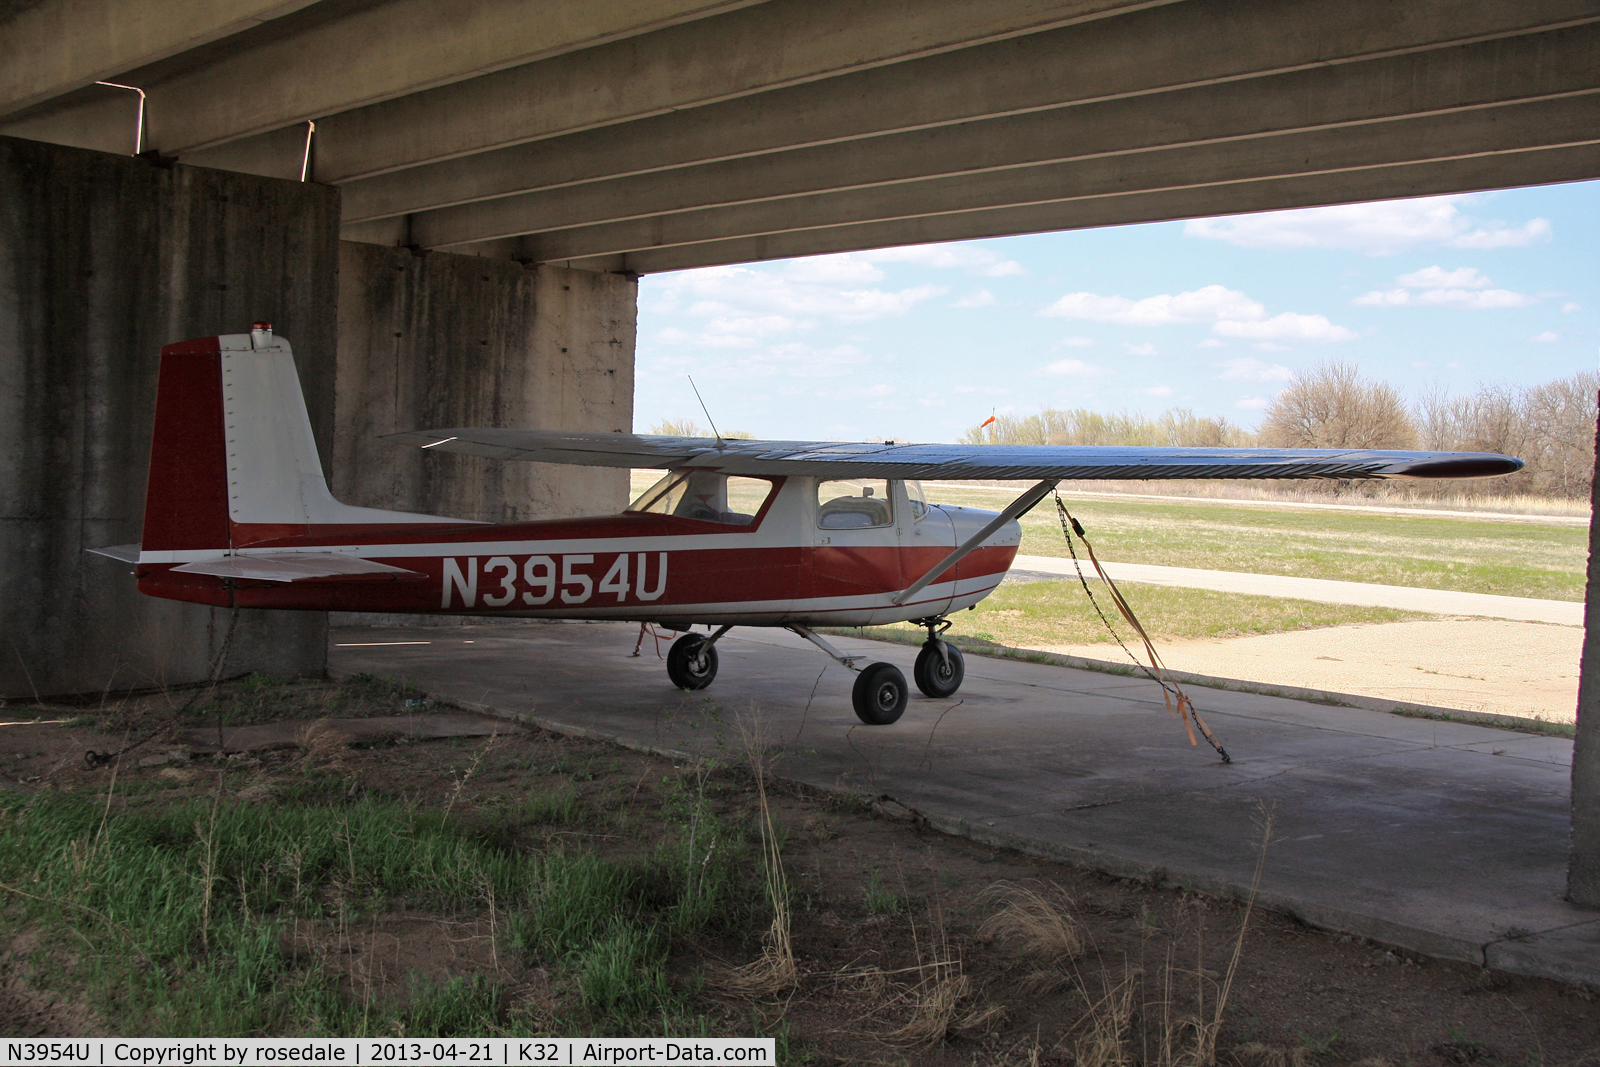 N3954U, 1965 Cessna 150E C/N 15061354, At her home airfield of Riverside, Wichita, KS before the airport was closed for development